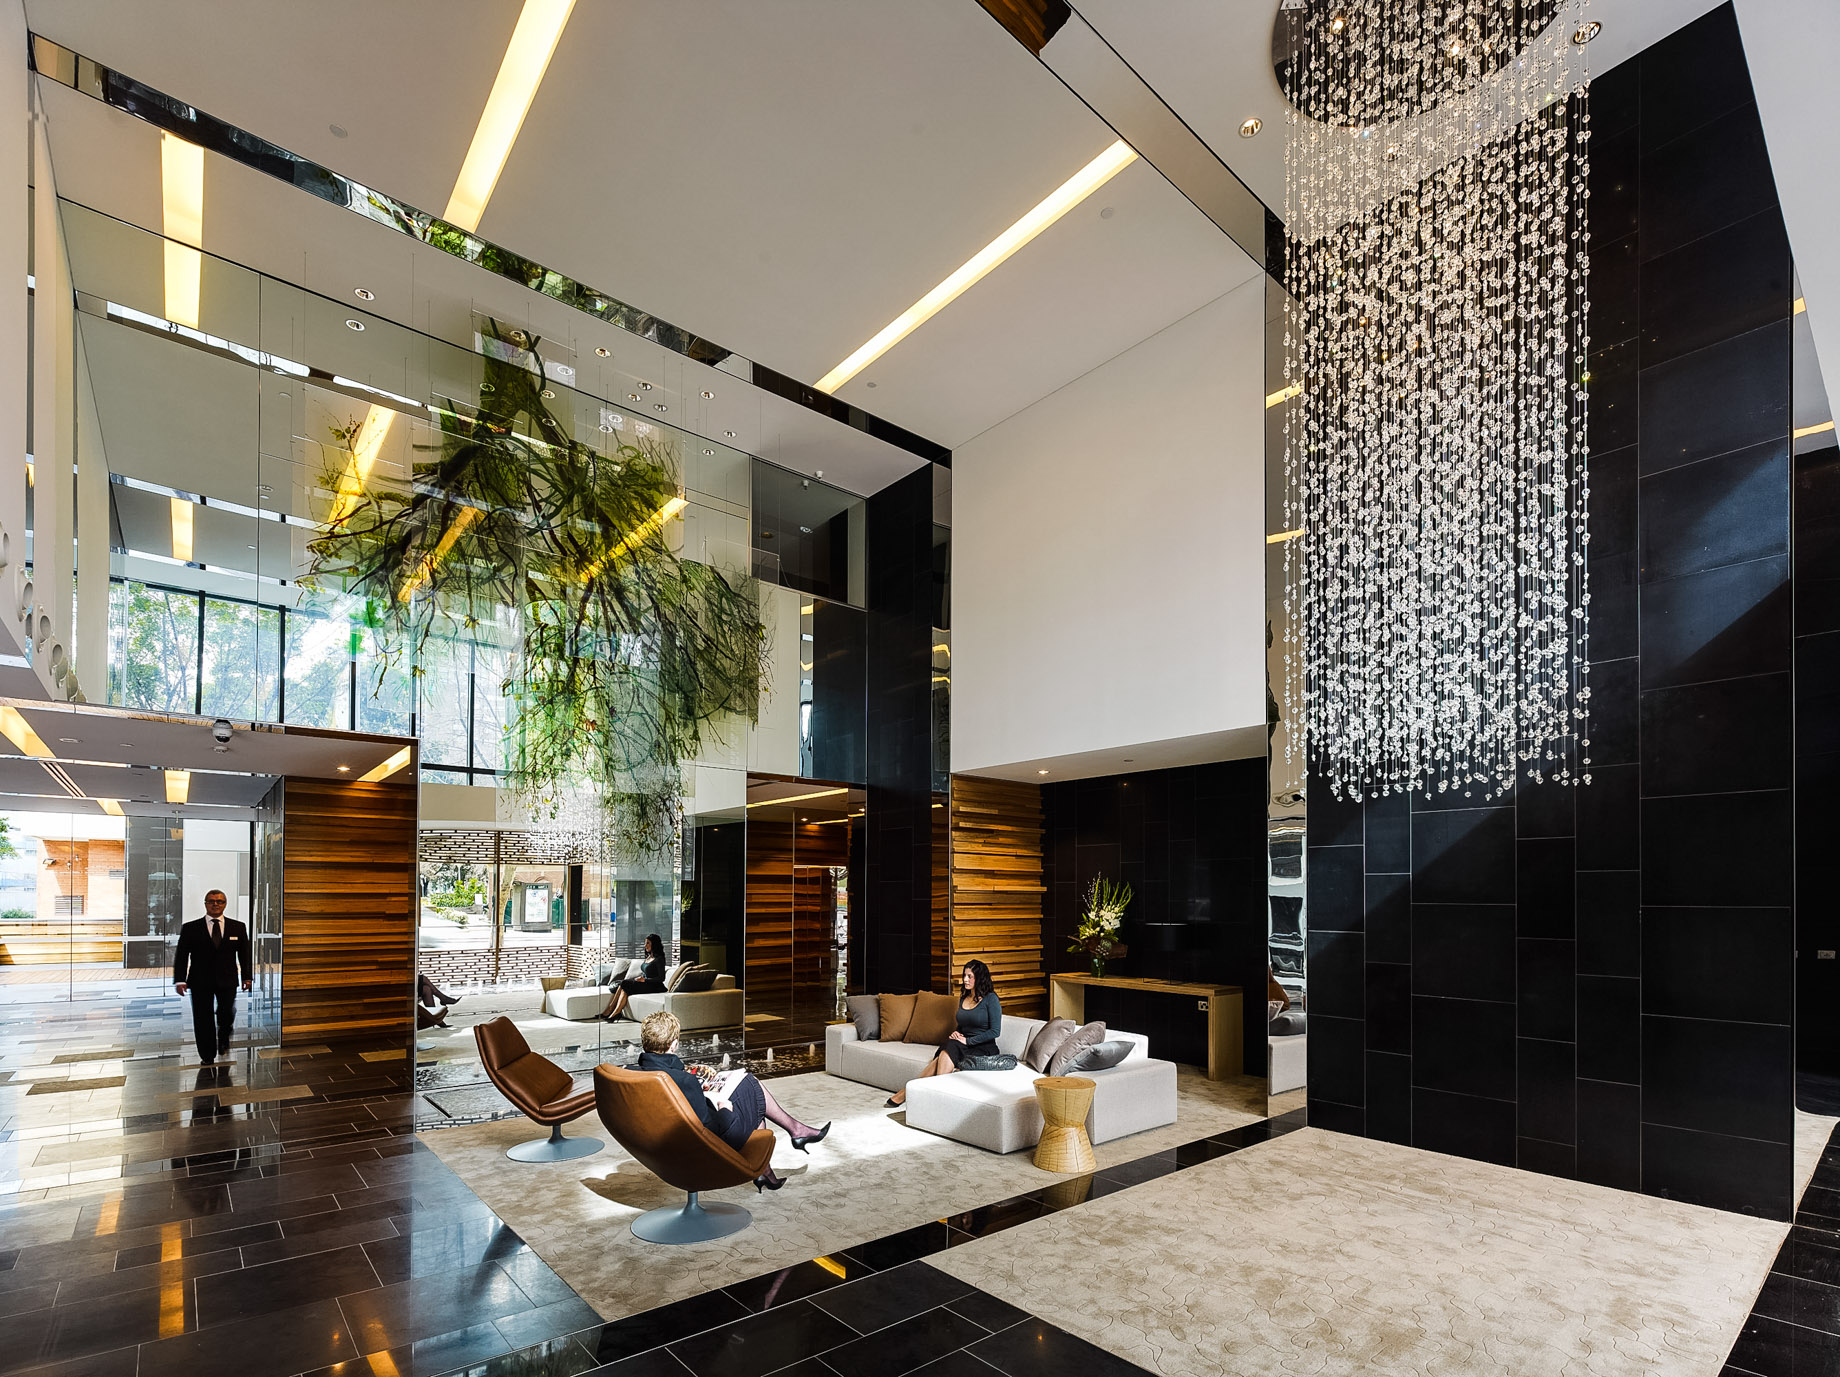 The Sunlit Double Lobby of the Luxury Hyde Apartment Building in Sydney, Australia